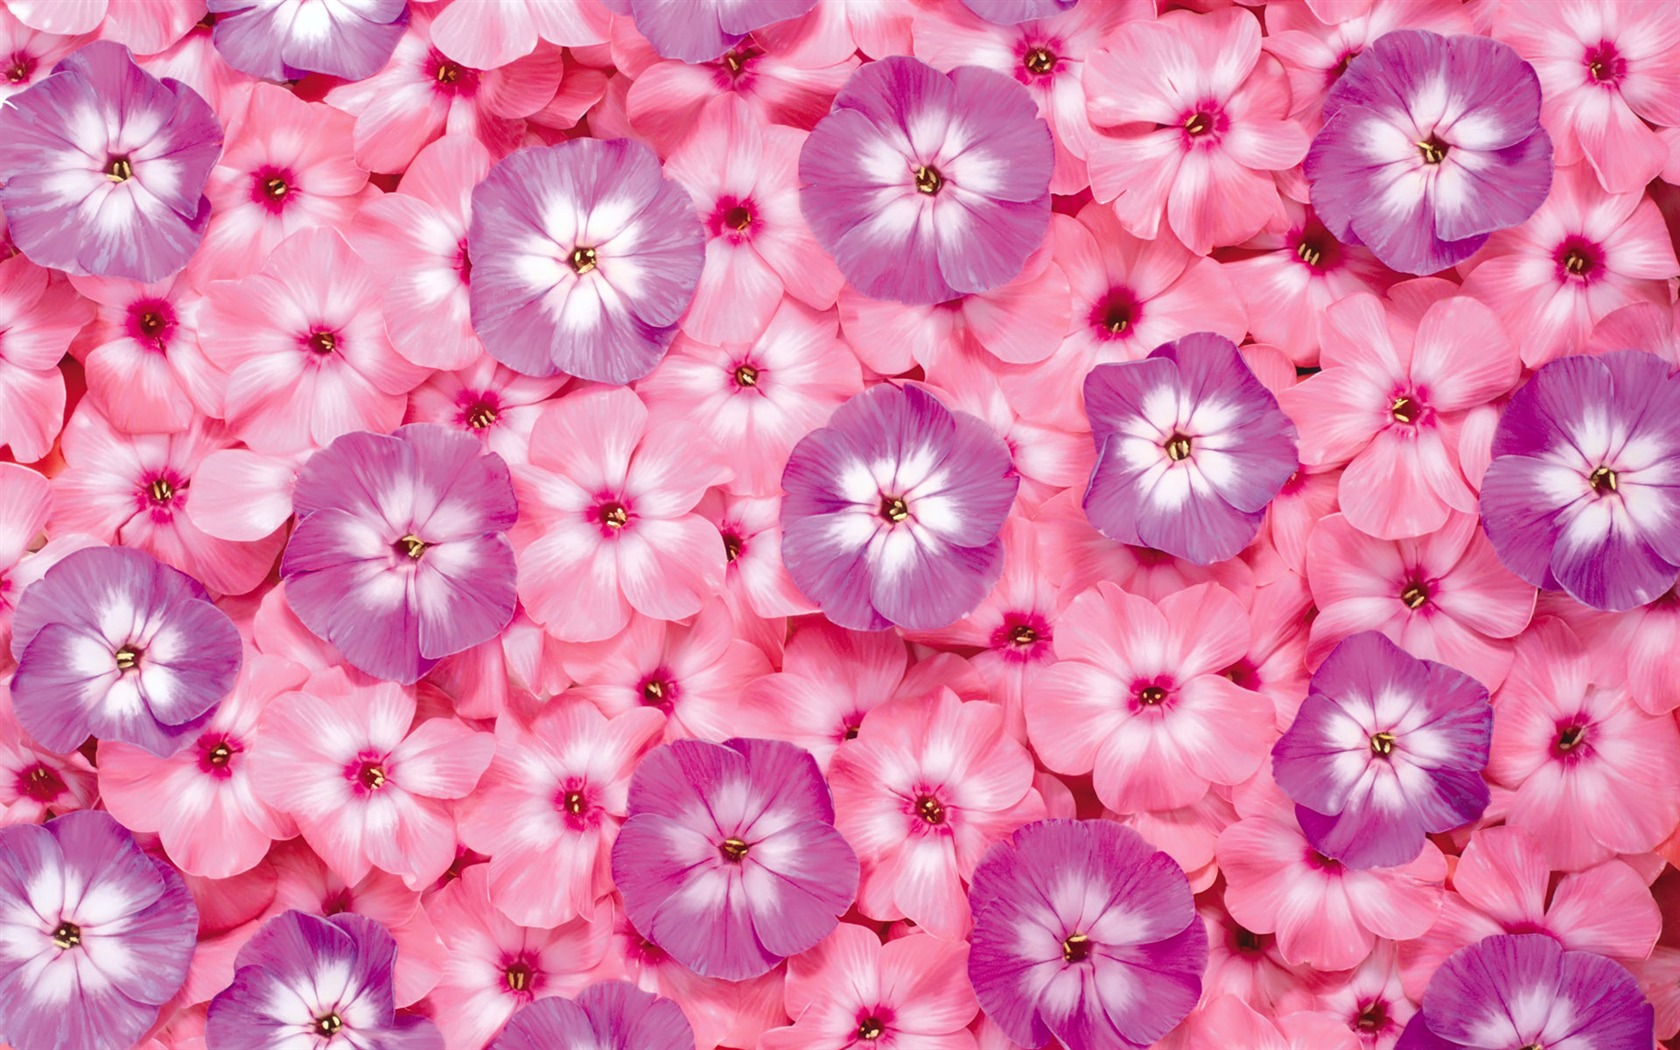 Surrounded by stunning flowers wallpaper #5 - 1680x1050